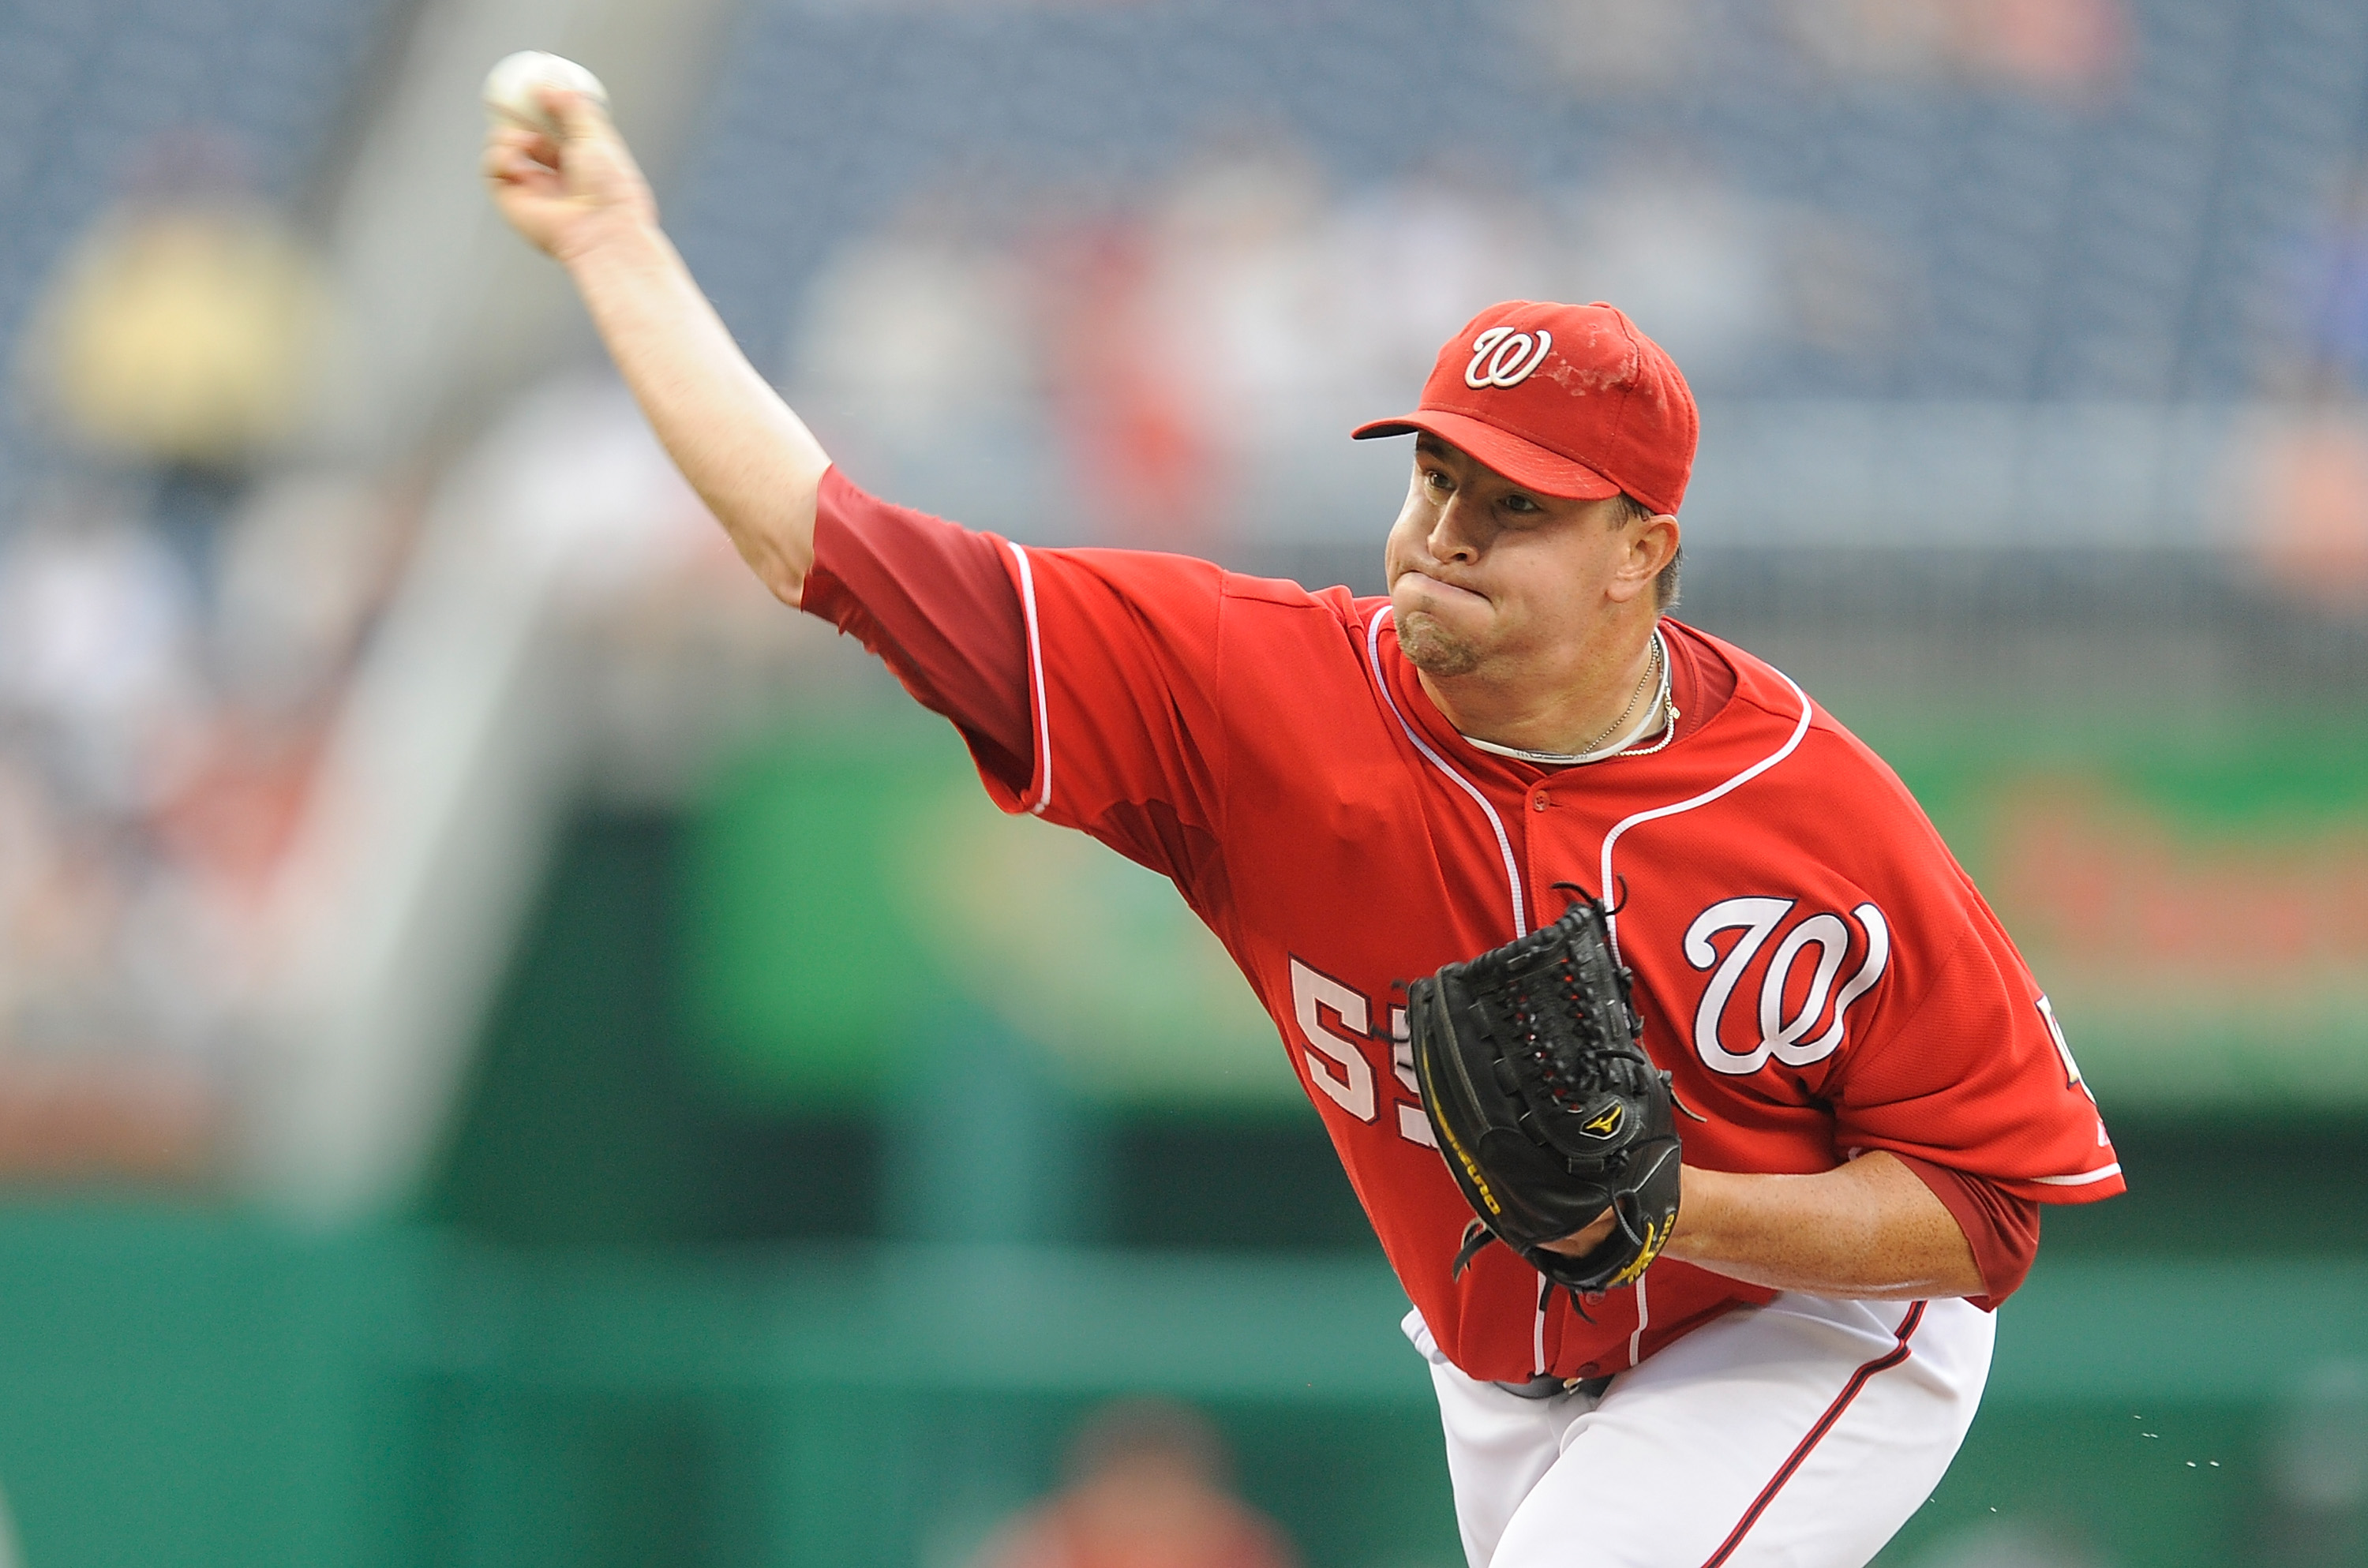 WASHINGTON - JULY 29:  Matt Capps #55 of the Washington Nationals pitches against the Atlanta Braves at Nationals Park on July 29, 2010 in Washington, DC.  (Photo by Greg Fiume/Getty Images)